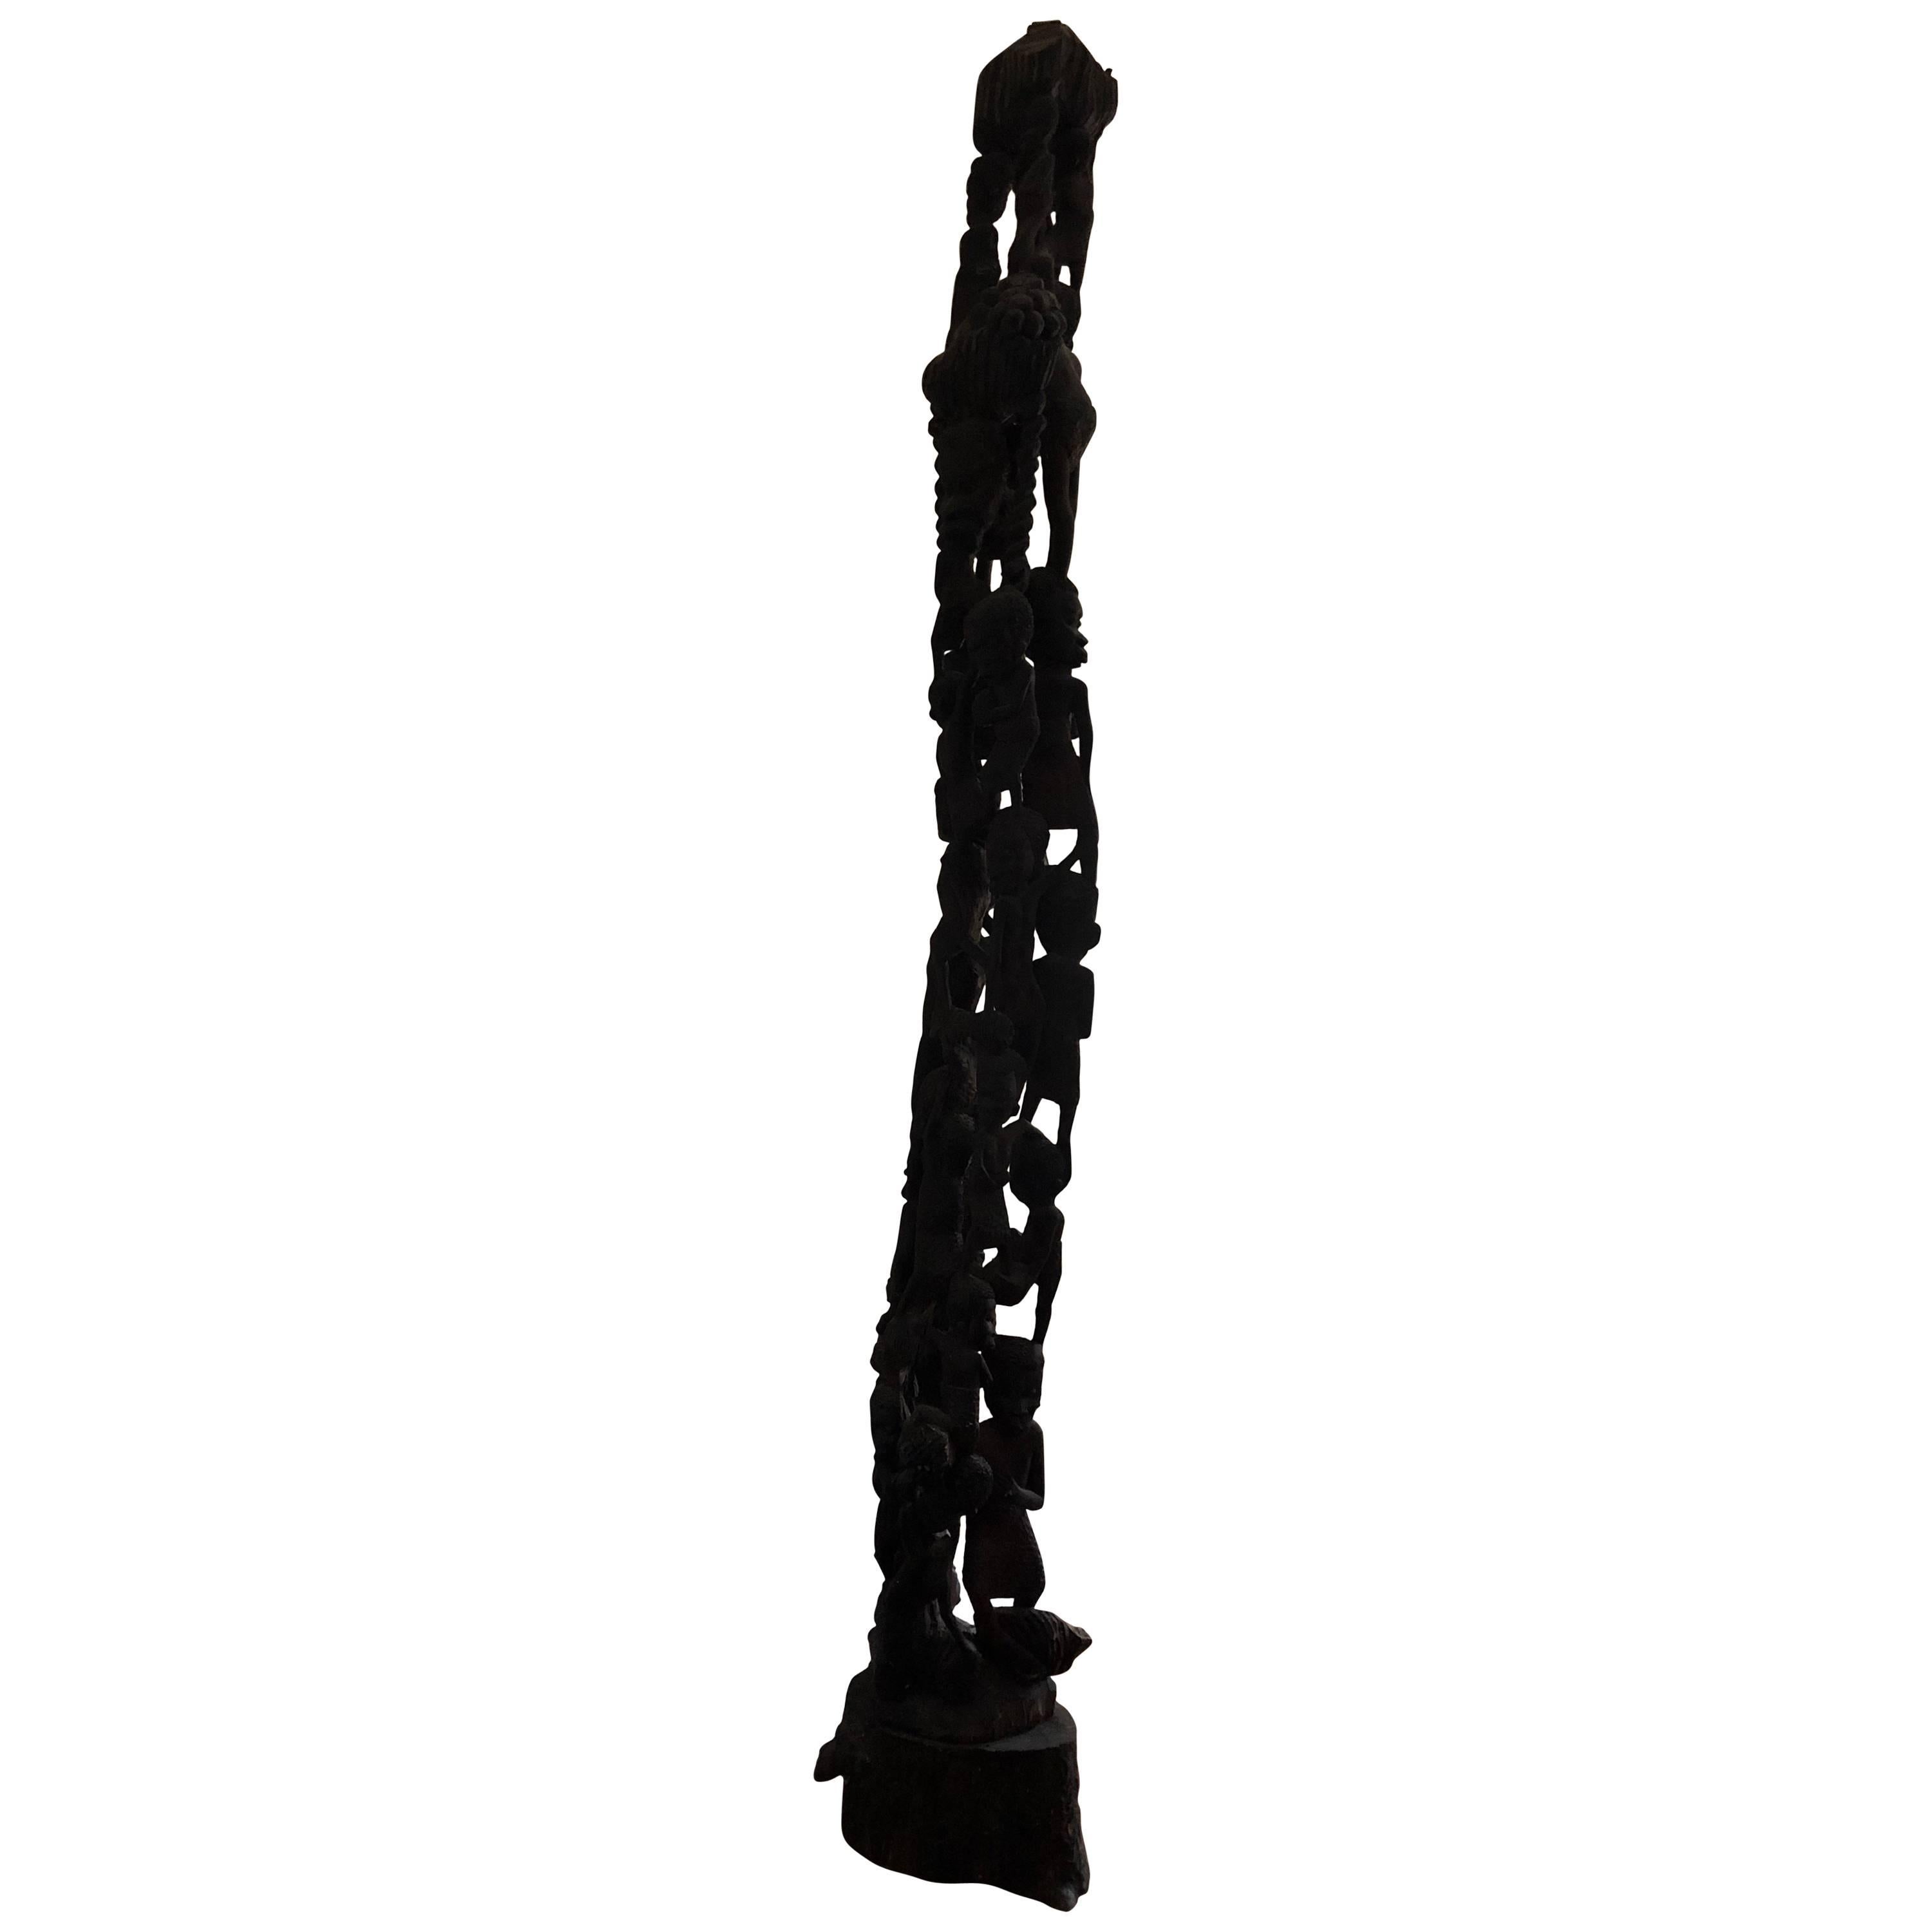 Super Tall Fabulously Hand-Carved African Sculpture